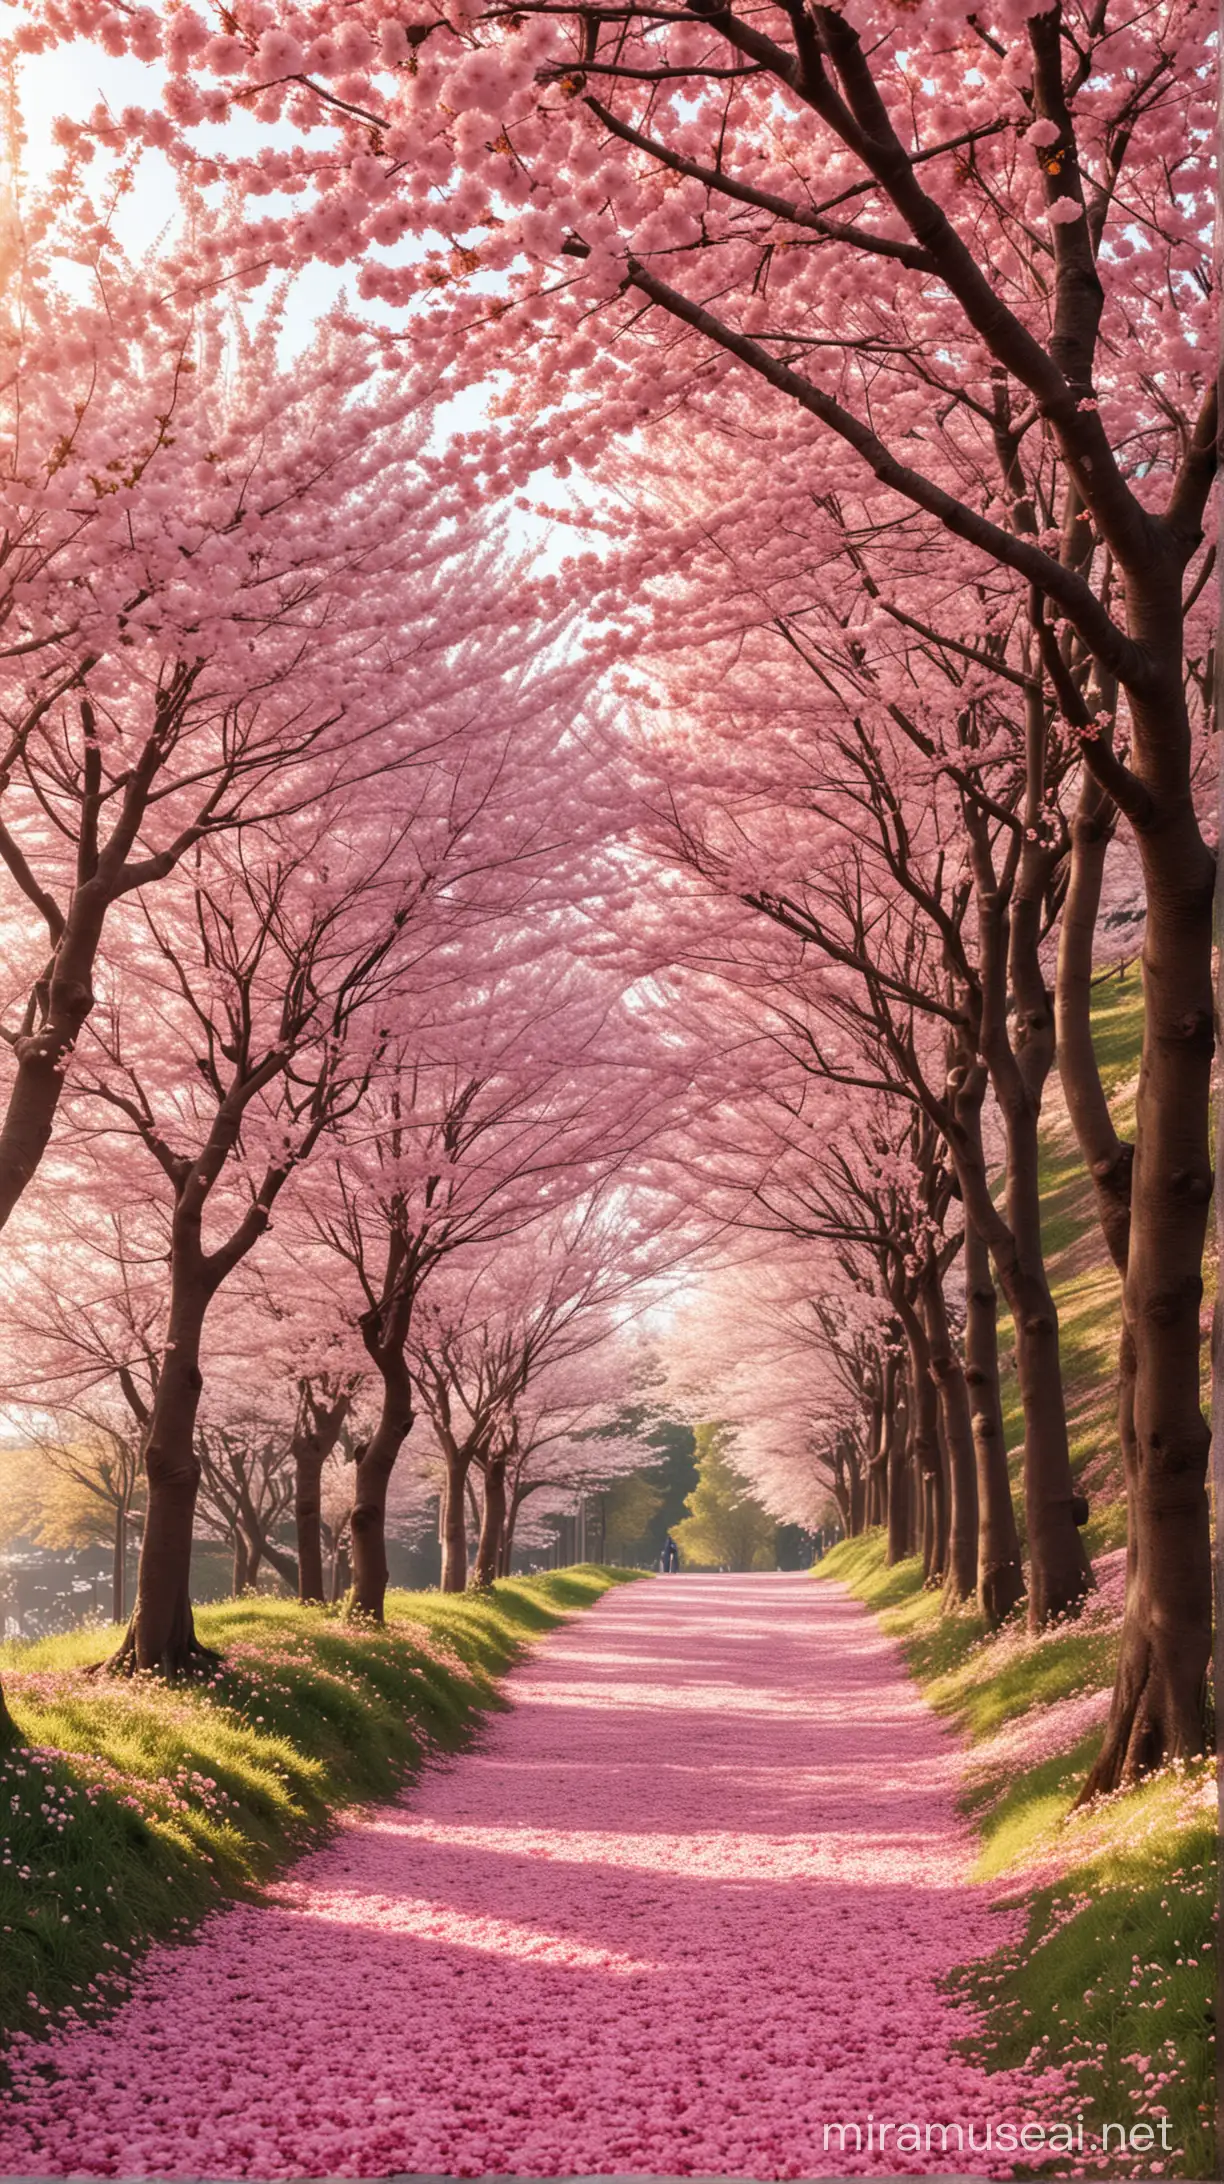 A breathtakingly beautiful real-life photograph of a small hill lined with fully bloomed cherry blossom trees, the scene is covered with cherry blossom petals, sunlight filtering through the petals creating a serene and magical atmosphere, masterpiece,best quality, highres, 8K photograph, Nikon